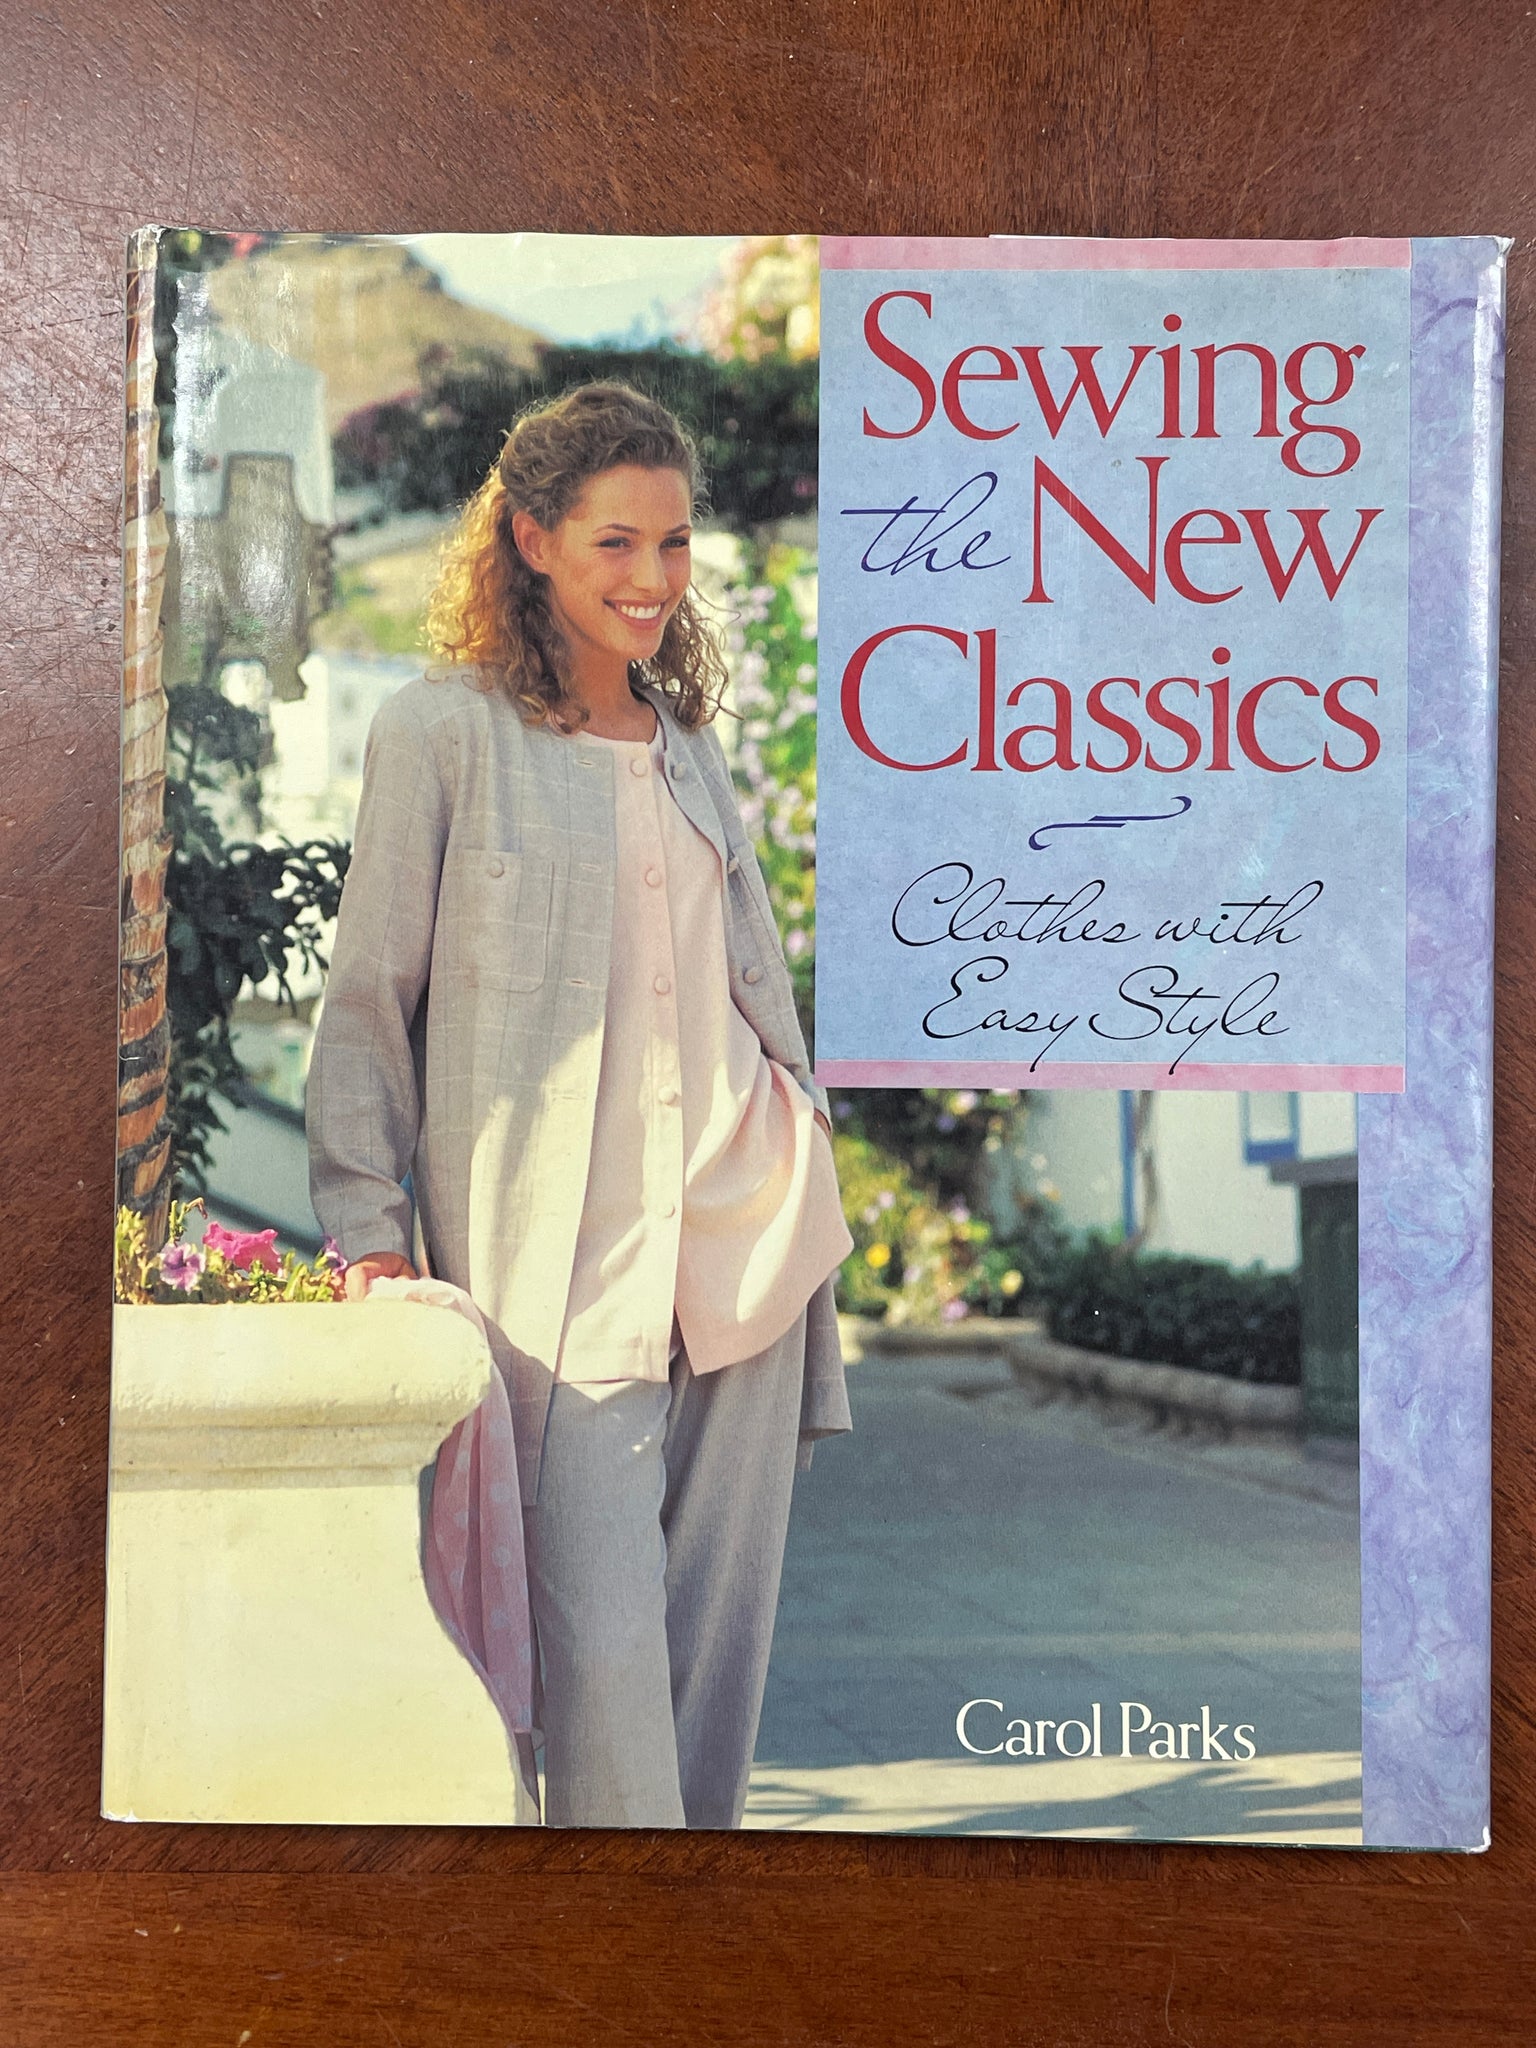 1995 Sewing Book - "Sewing the New Classics"